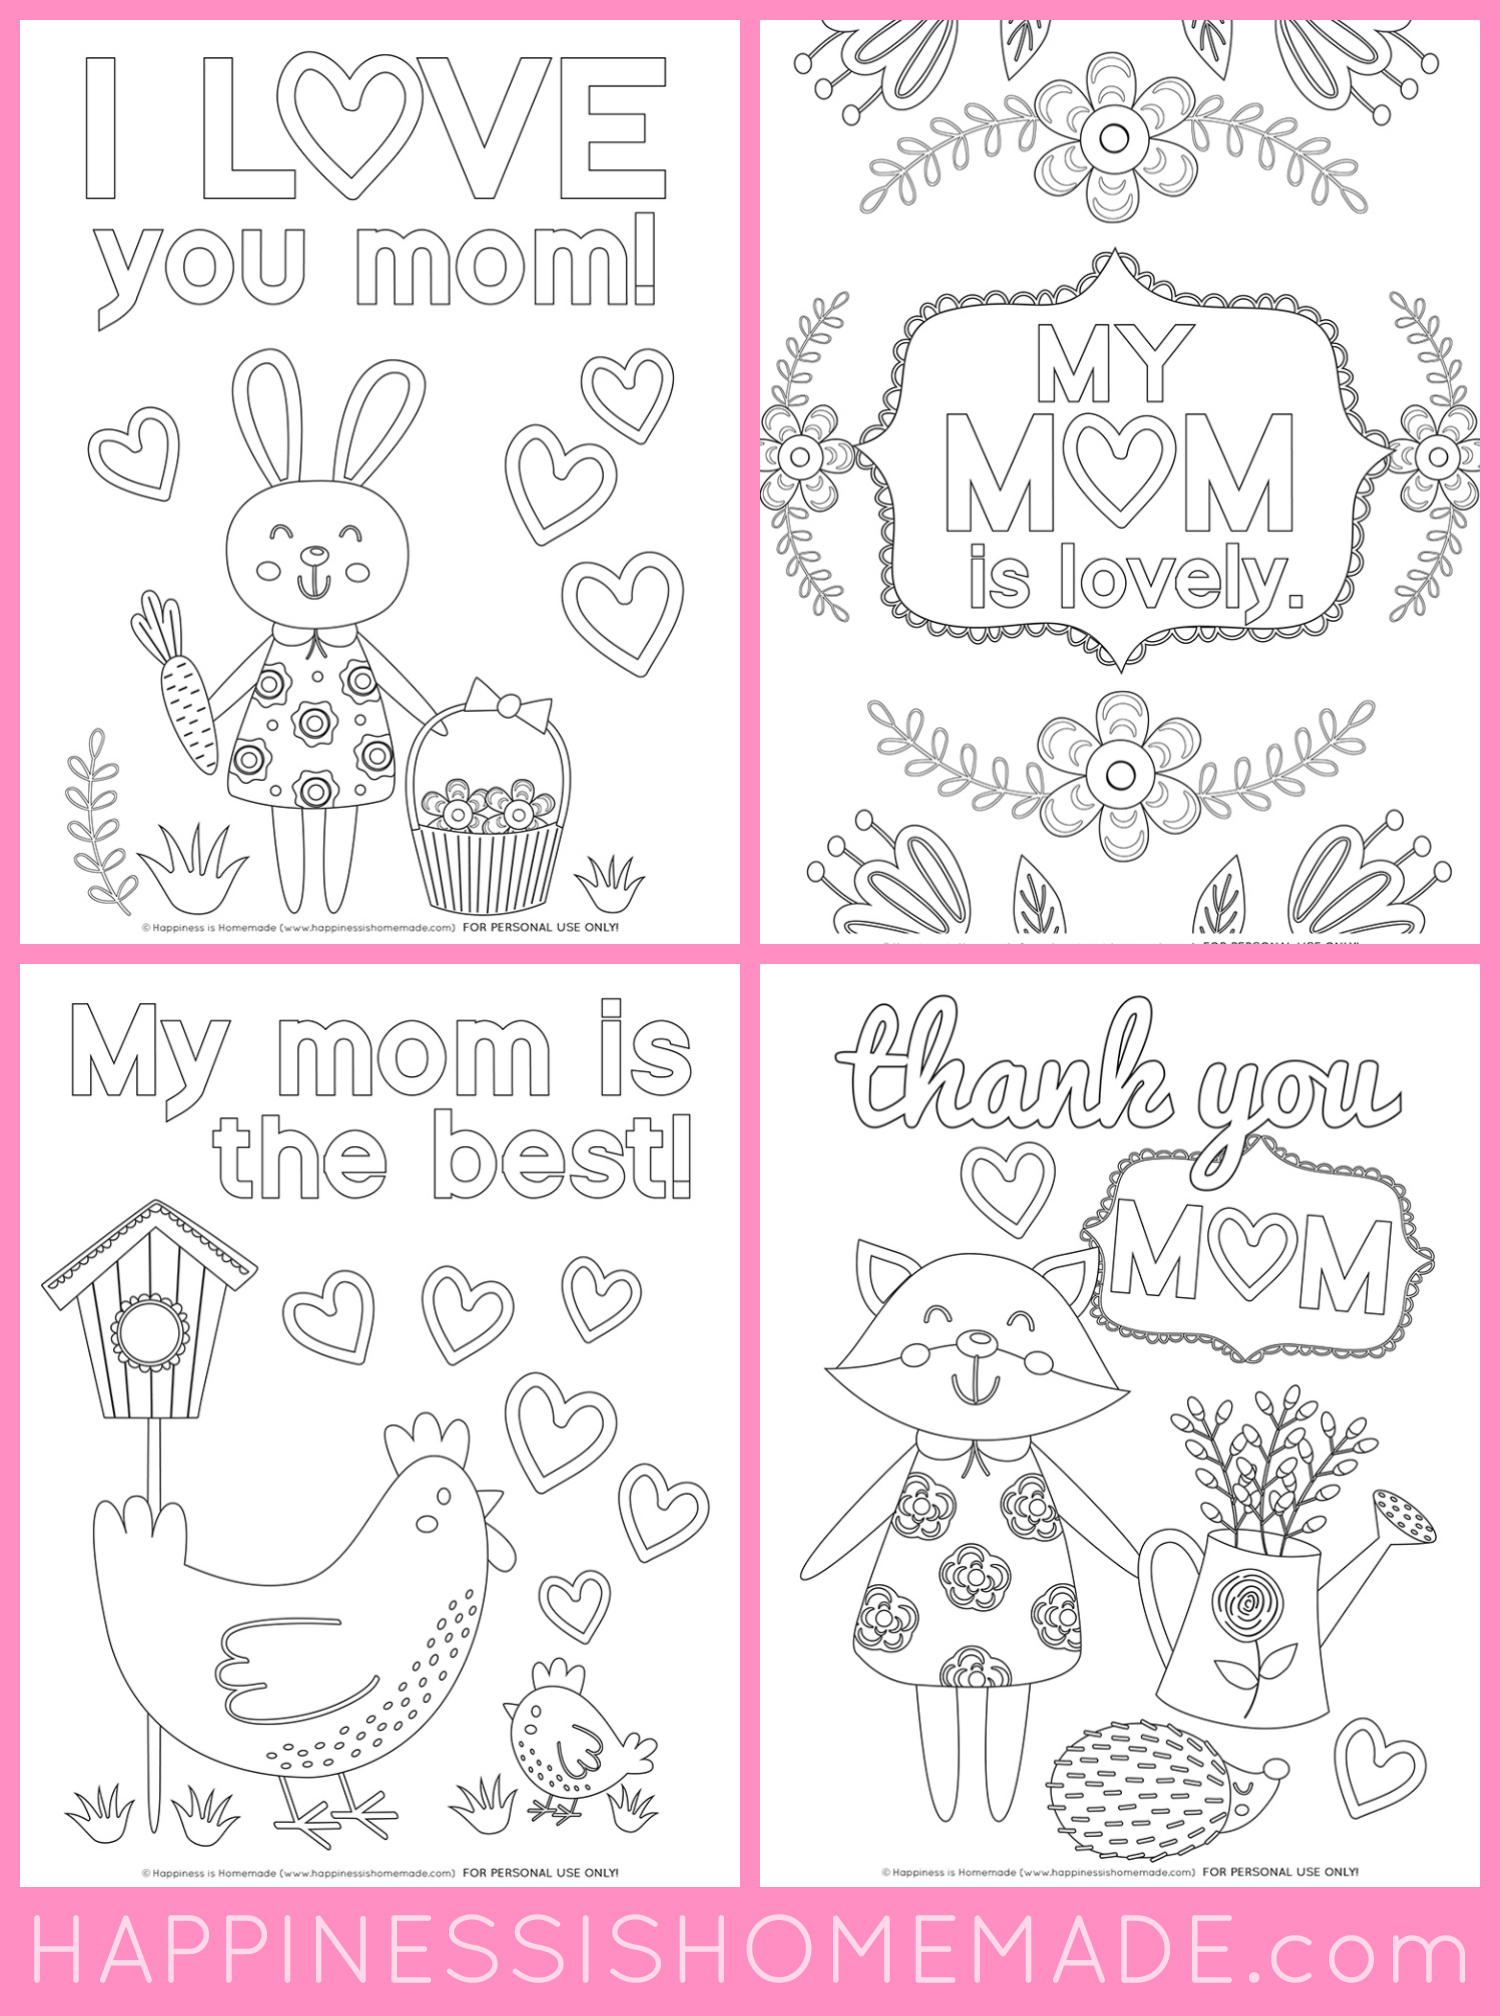 Free Mother's Day Coloring Pages Mothers Day Coloring Pages Free Printables Happiness Is Homemade